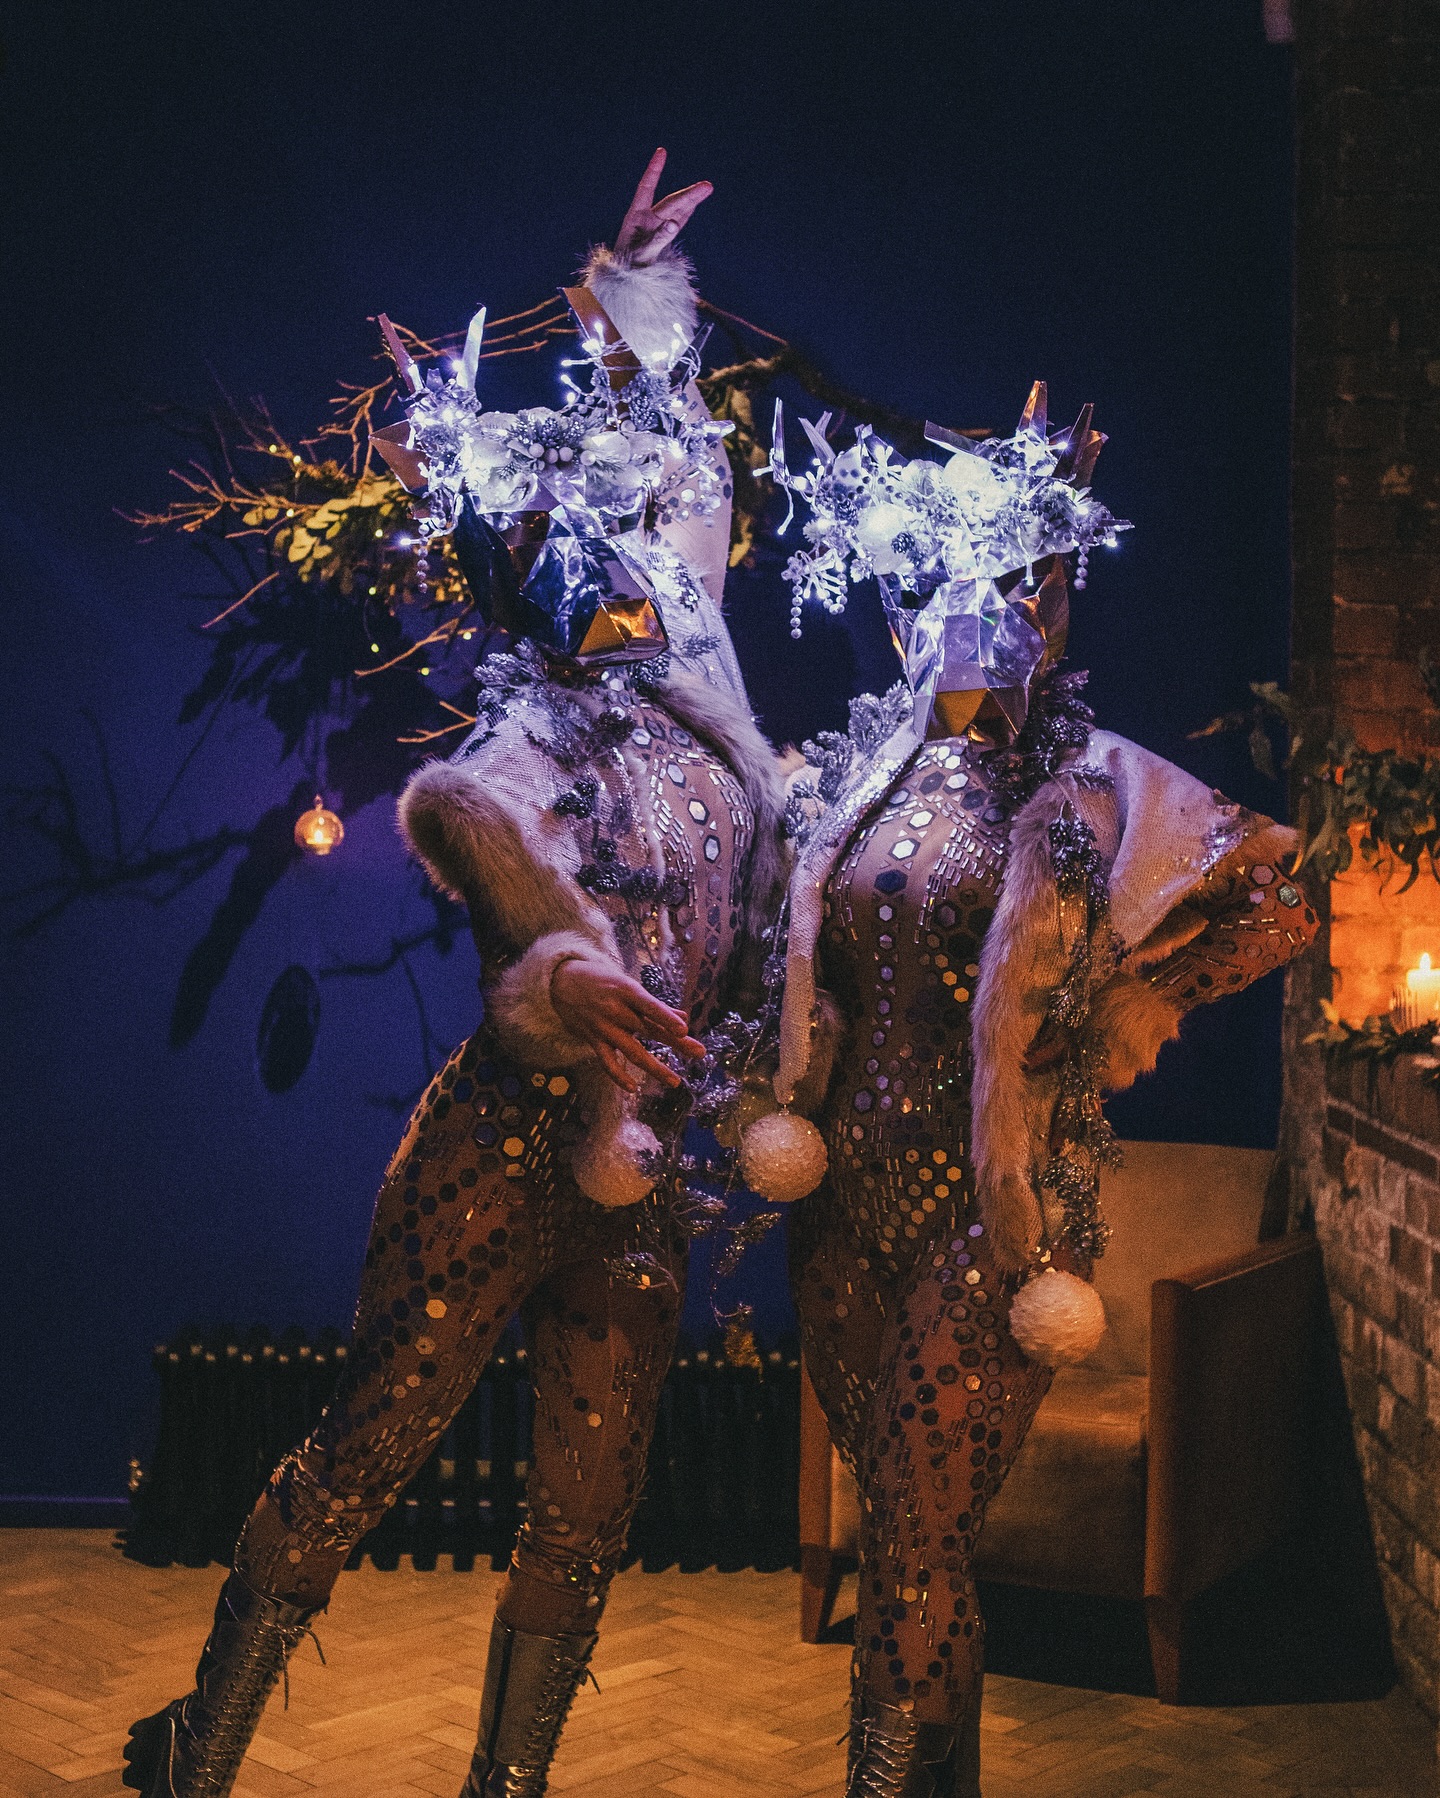 Happy New Year! Roll on 2024…

@the_cequincircus 

#christmas #christmasparty #corporatechristmas #xmas #xmasparty #event #eventdesign #eventstyle #party #partyideas #partydesign #partyinspiration #christmaspartyideas #photographystudio #photographystudios #studiohiremanchester #location #locationscout #photographylocation #events #eventlocation #eventvenue #venue #venuehire #creative #venuehiremanchester #fivefourstudios #manchester